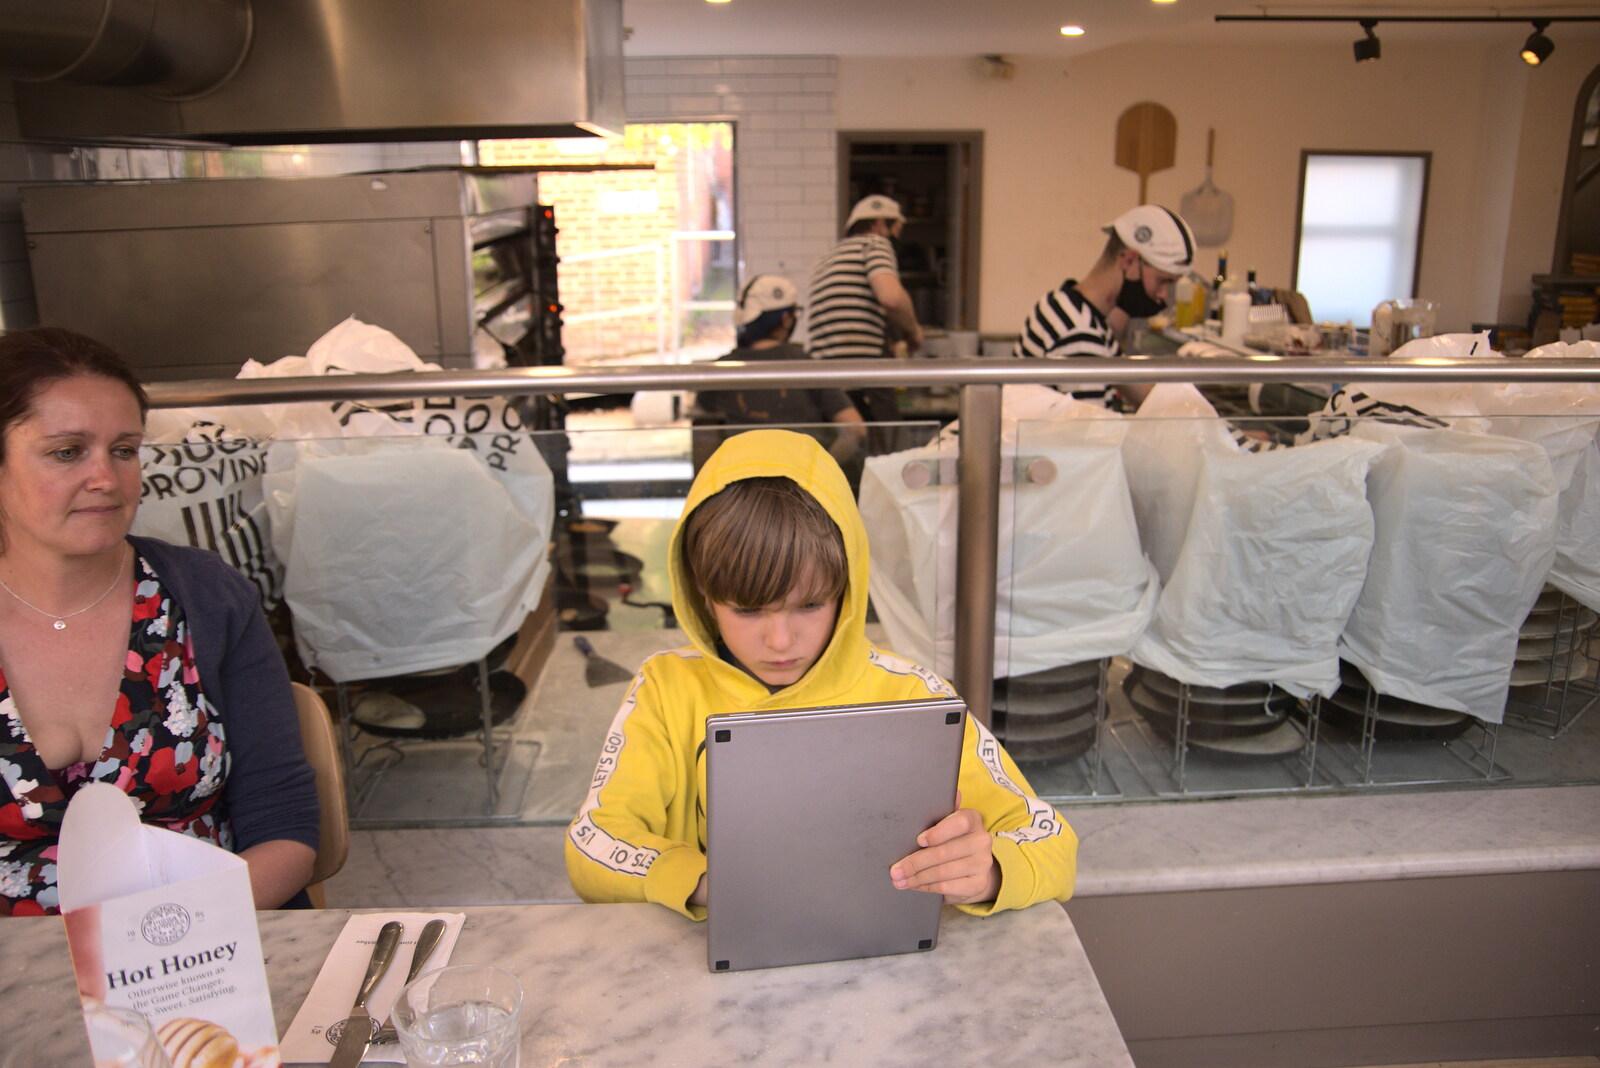 Harry checks his tablet in Pizza Express from A Weekend at the Angel Hotel, Bury St. Edmunds, Suffolk - 5th June 2021